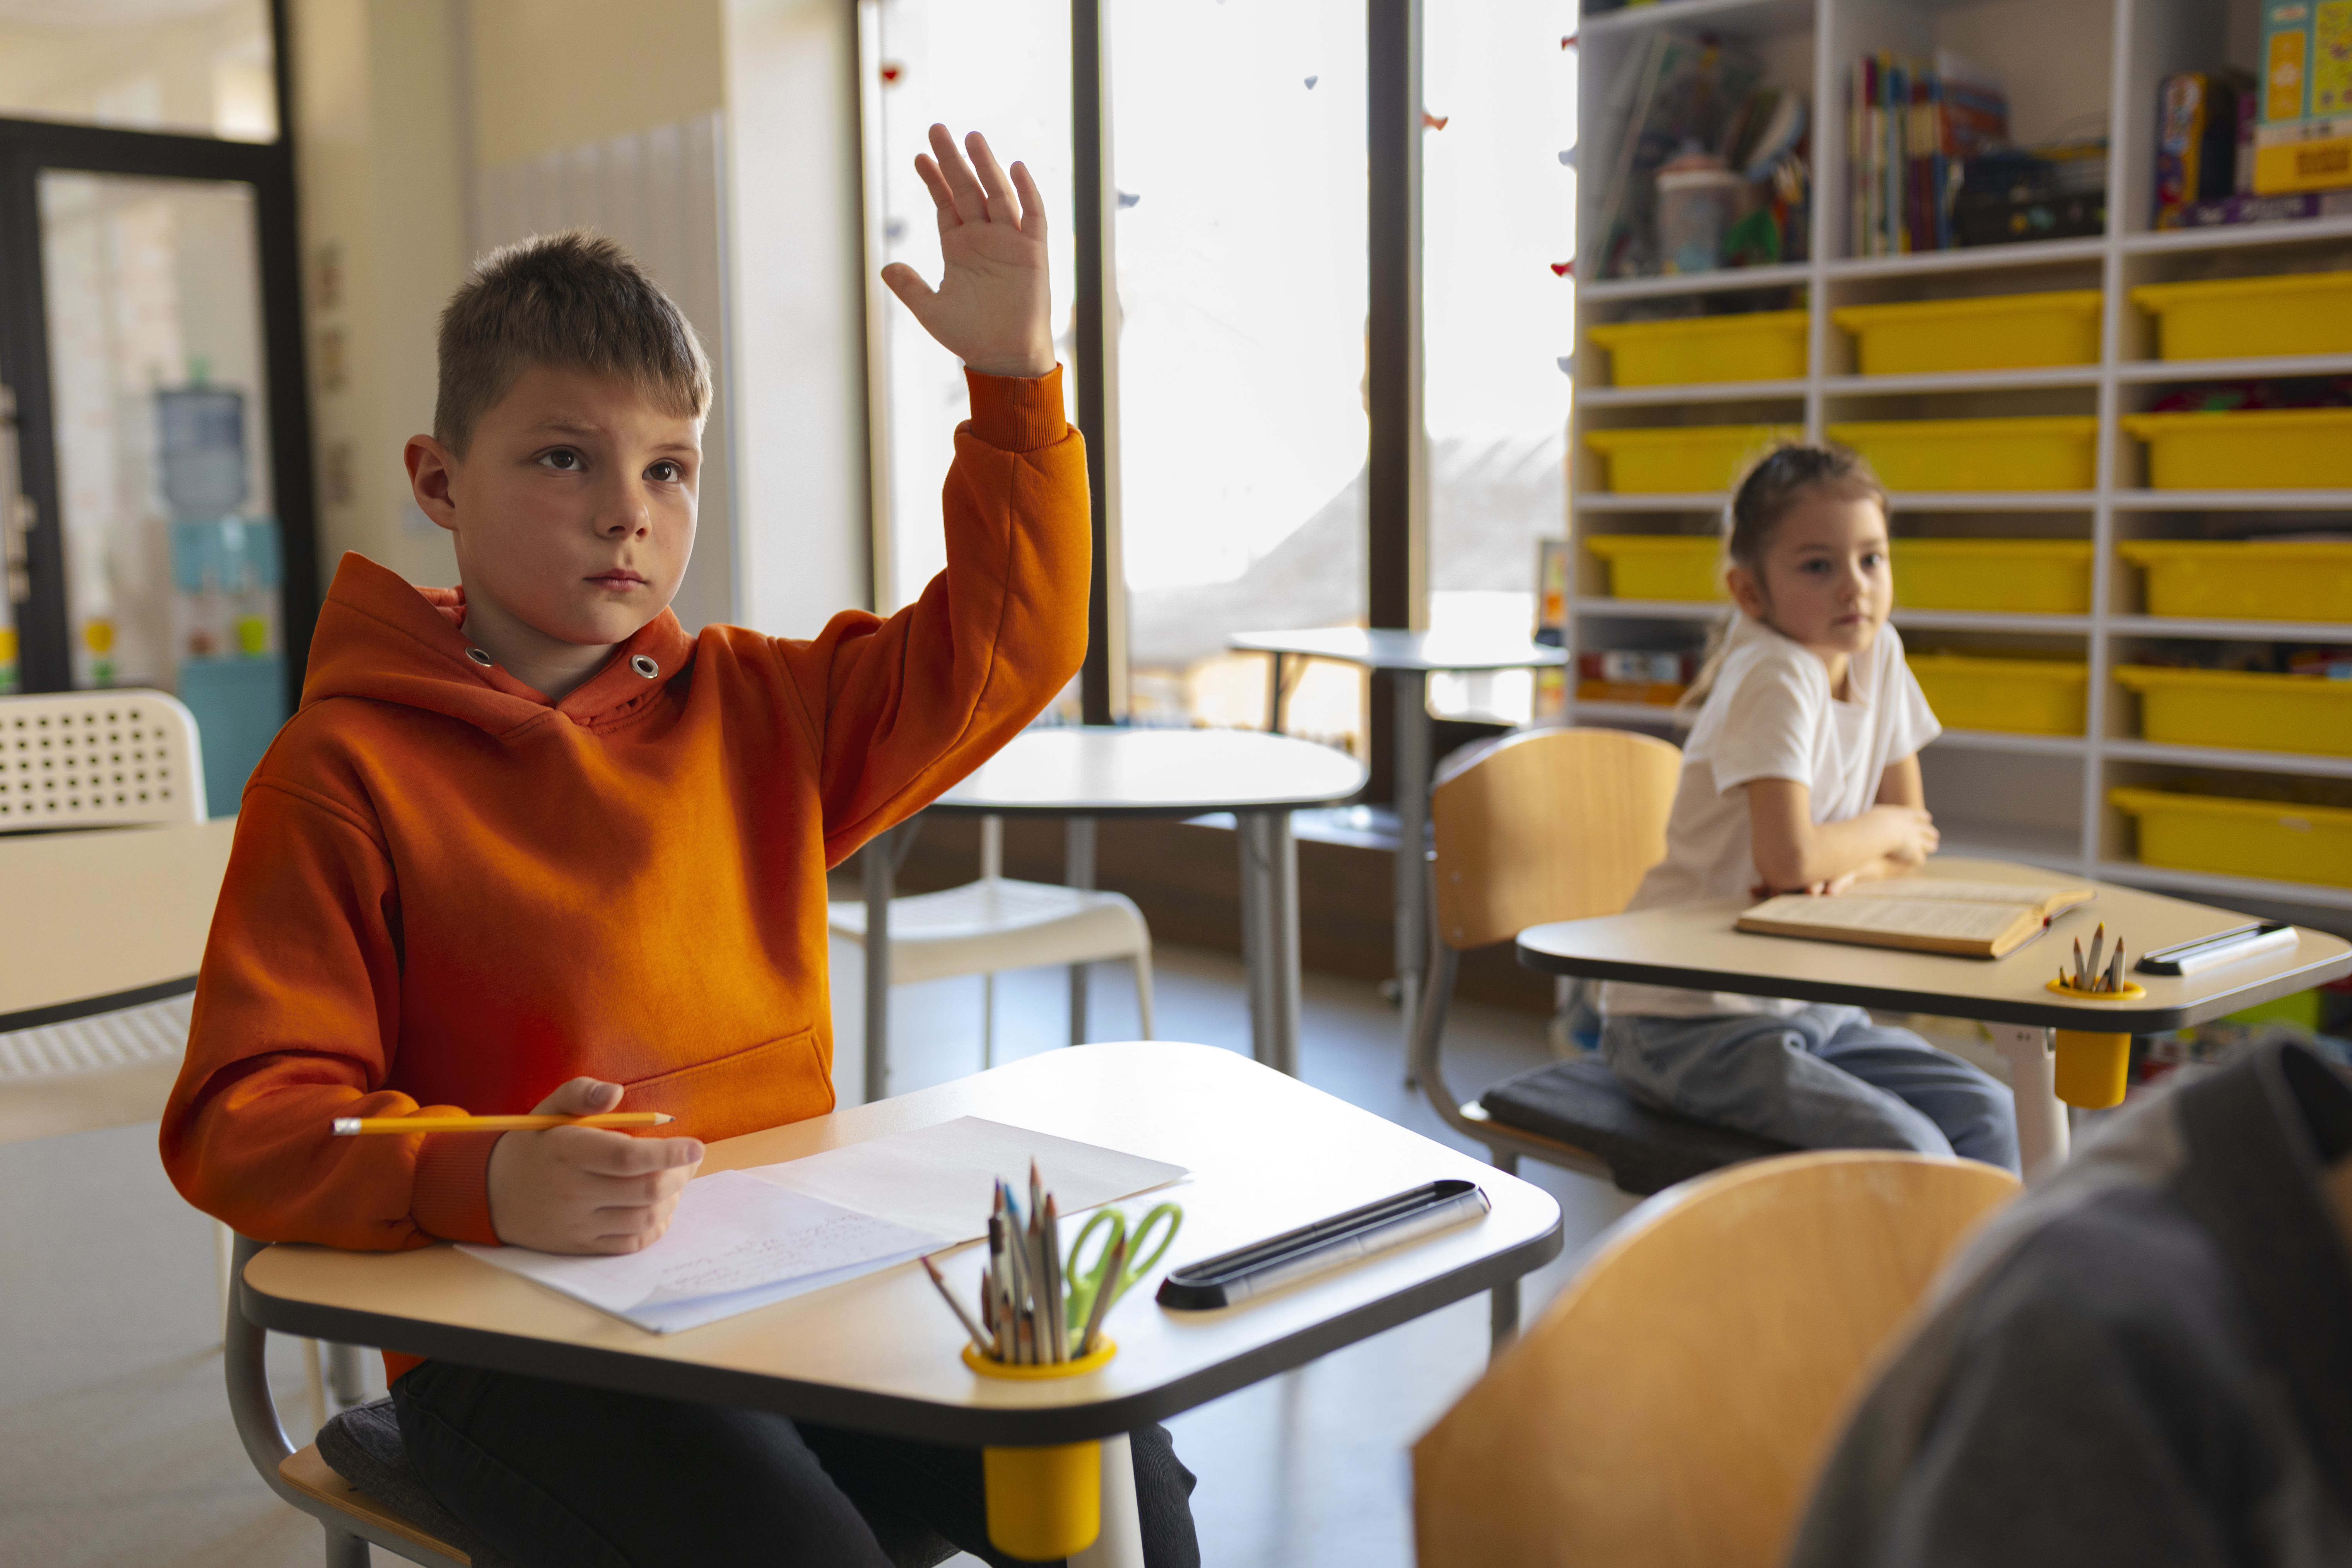 A young boy putting his hand up in class. | Source: freepik